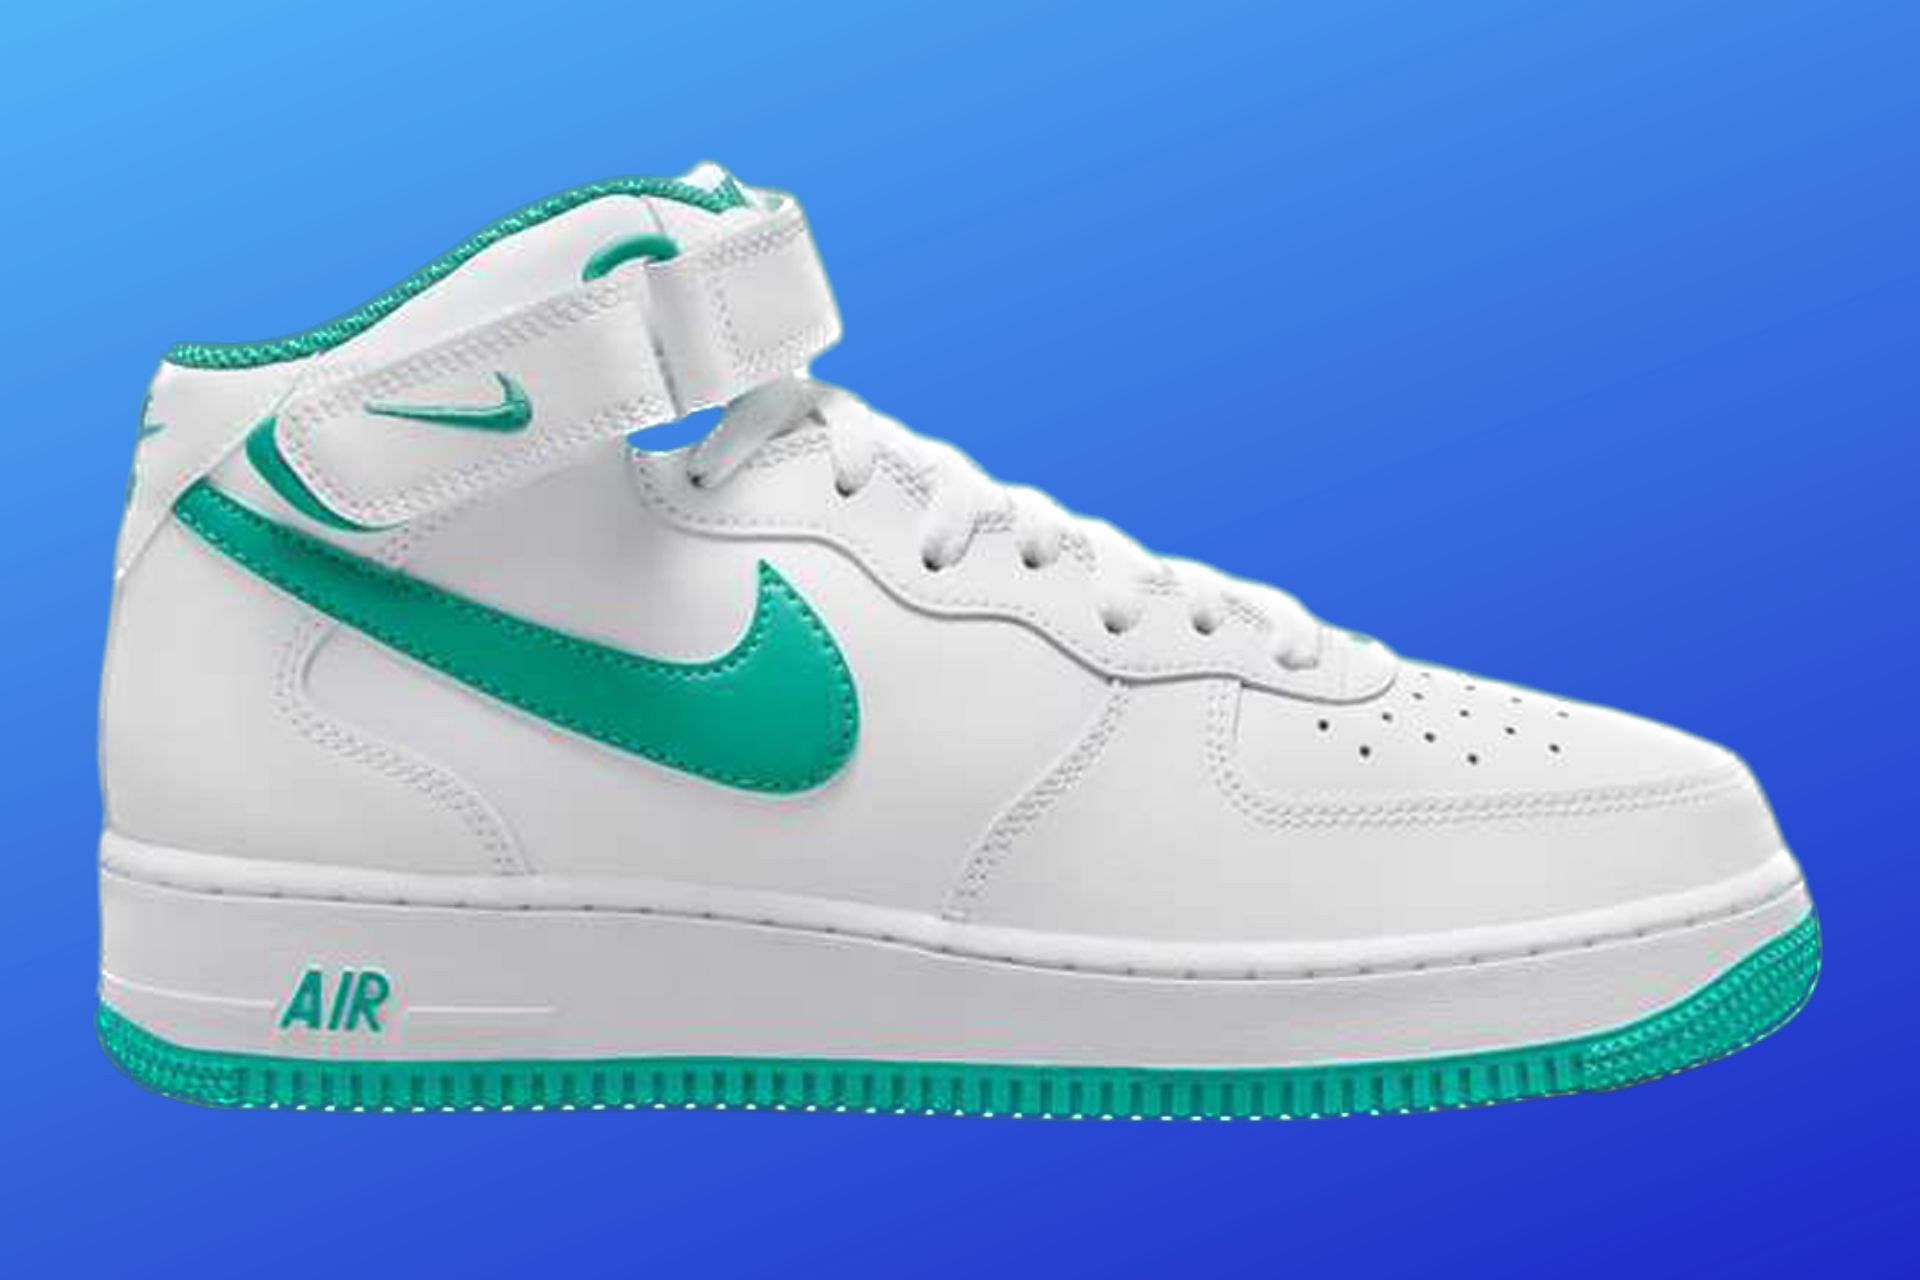 Nike Air Force 1 Mid “Fresh” shoes: Where to get, price, and more